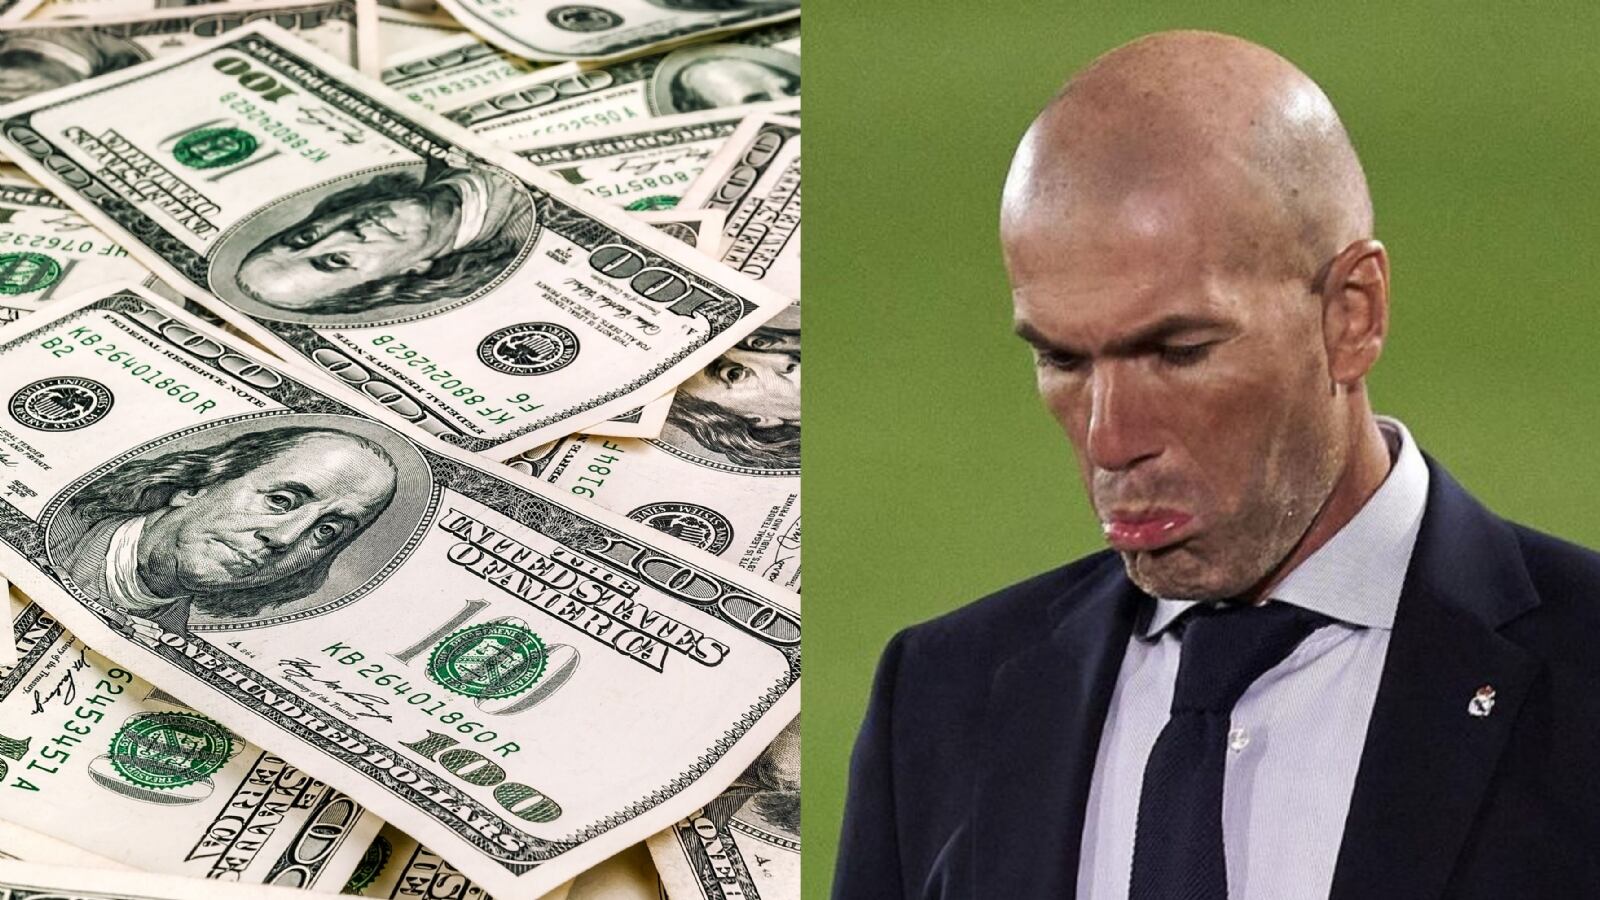 The new dream of Zinedine Zidane and Real Madrid is worth almost $50 million